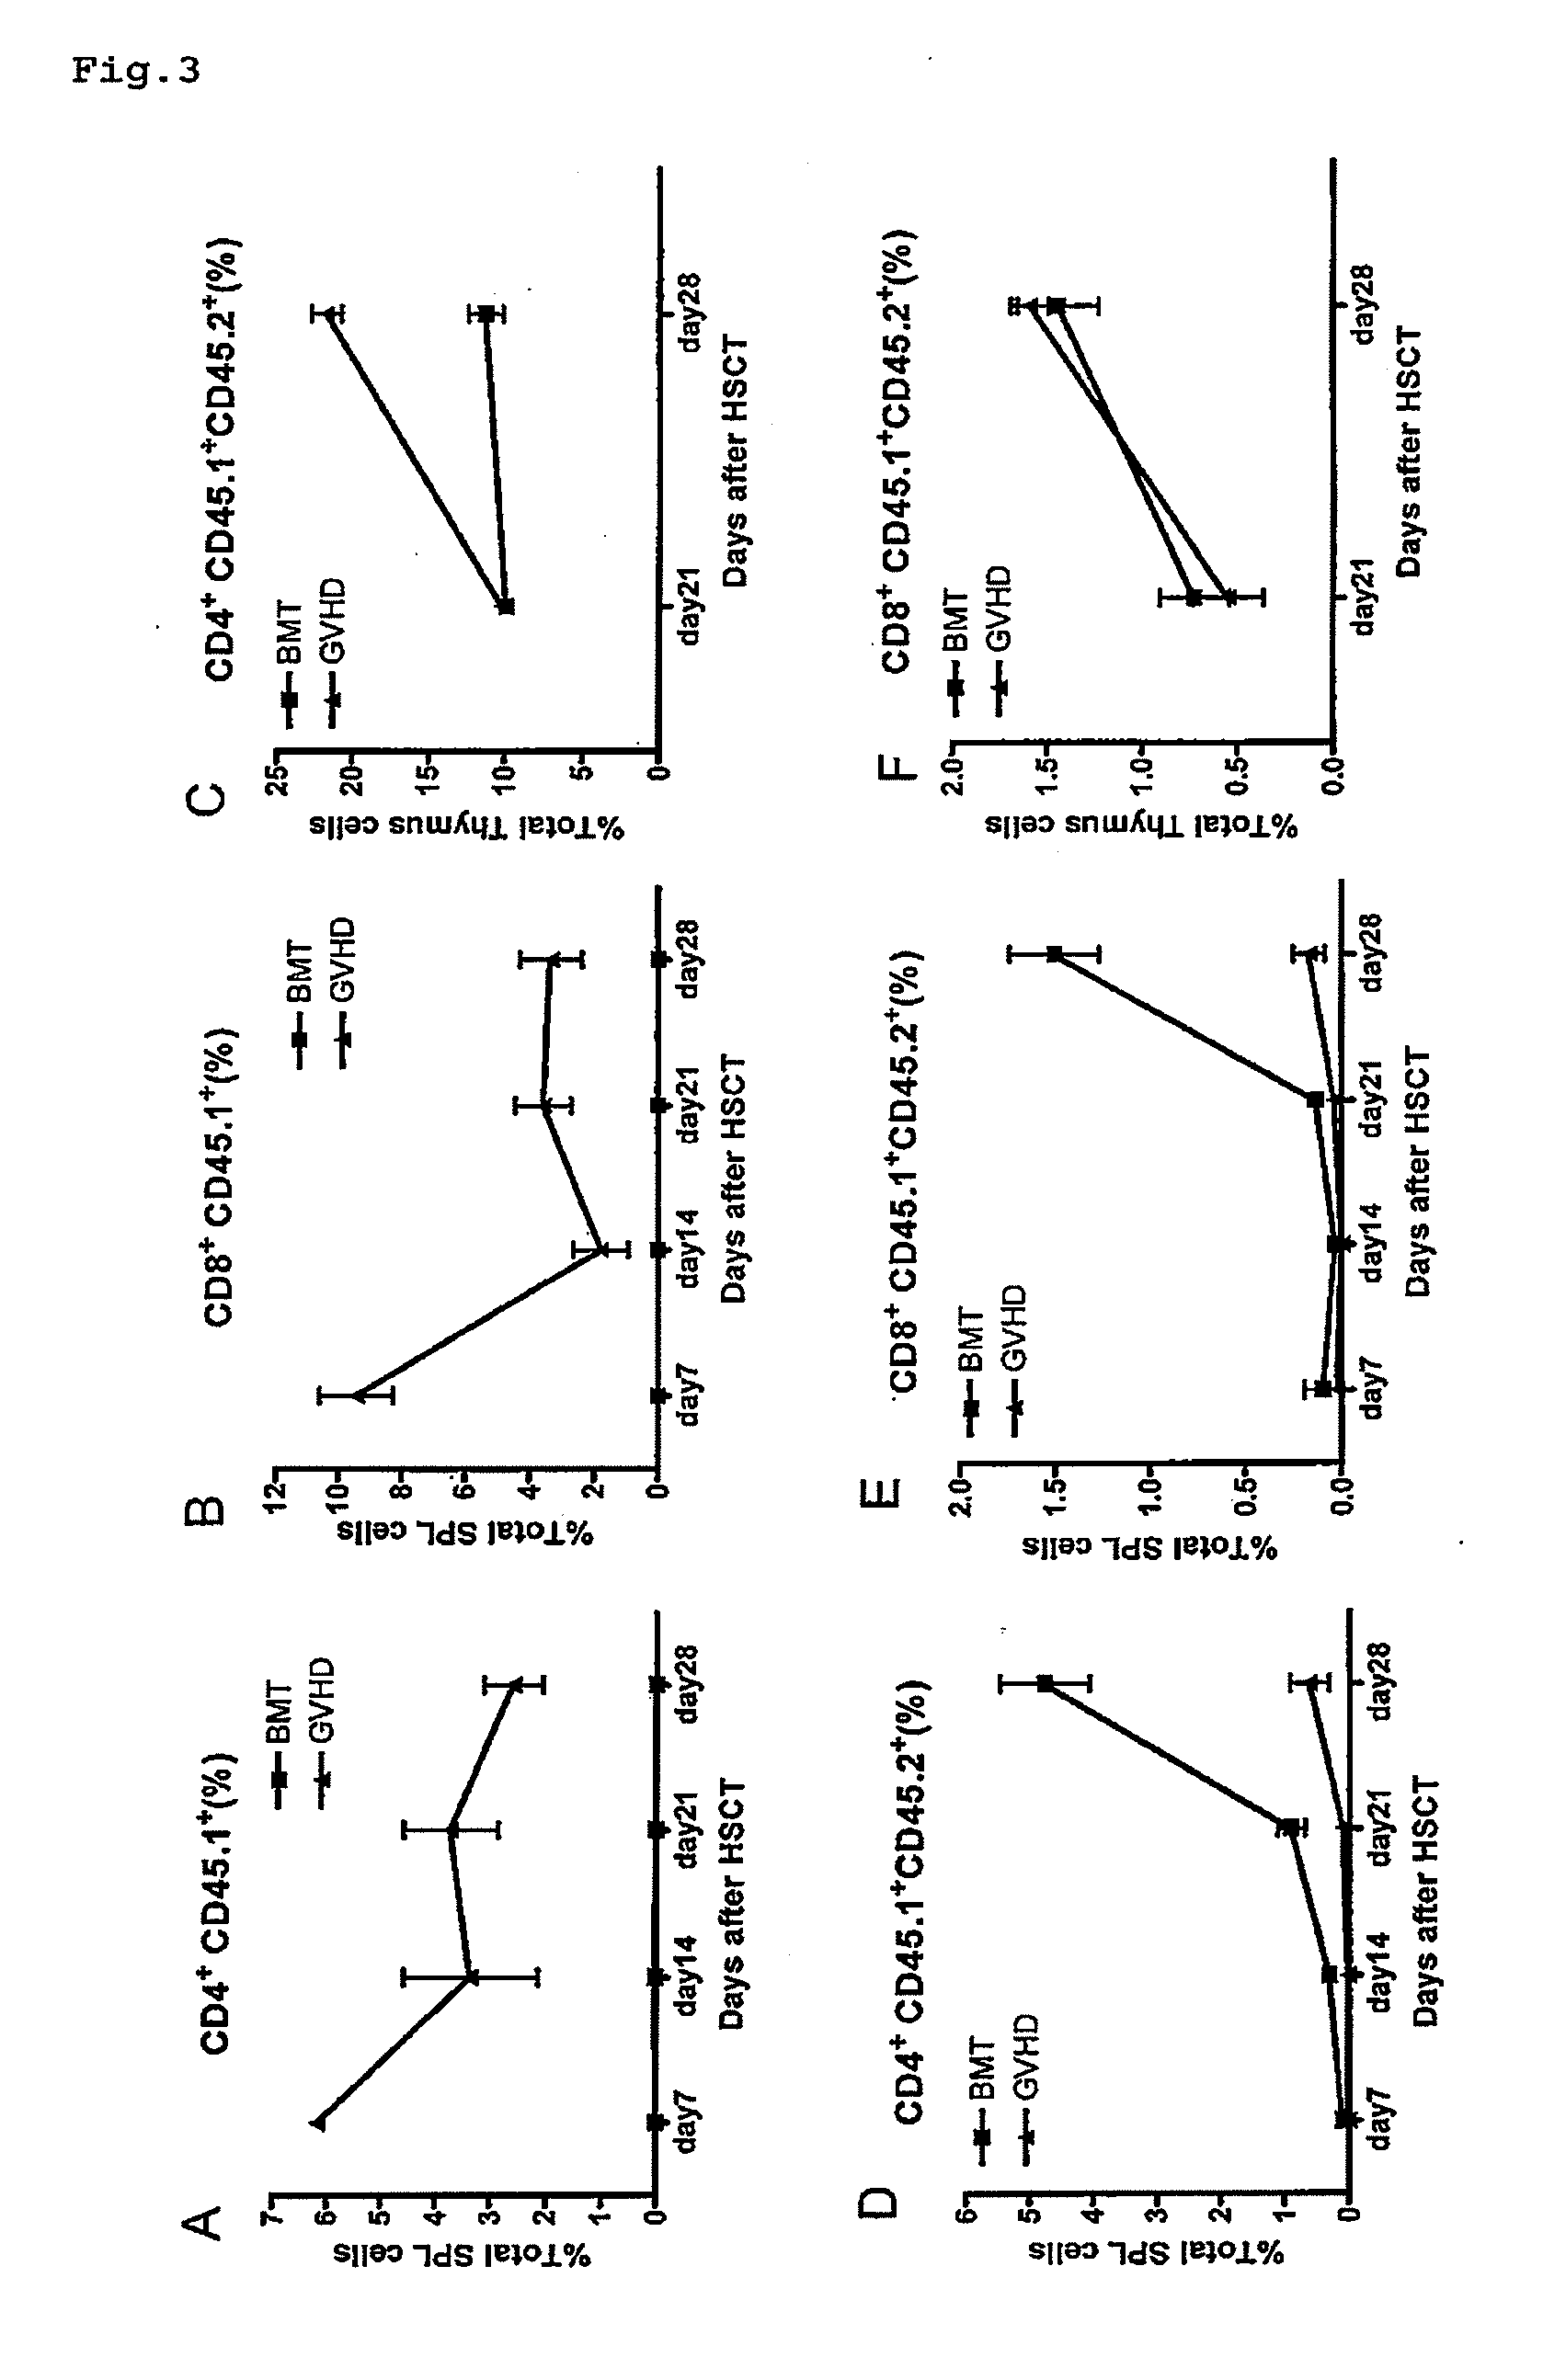 Immunological reconstitution promoter or prophylactic agent for infections each of which maintains graft-versus-tumor effect